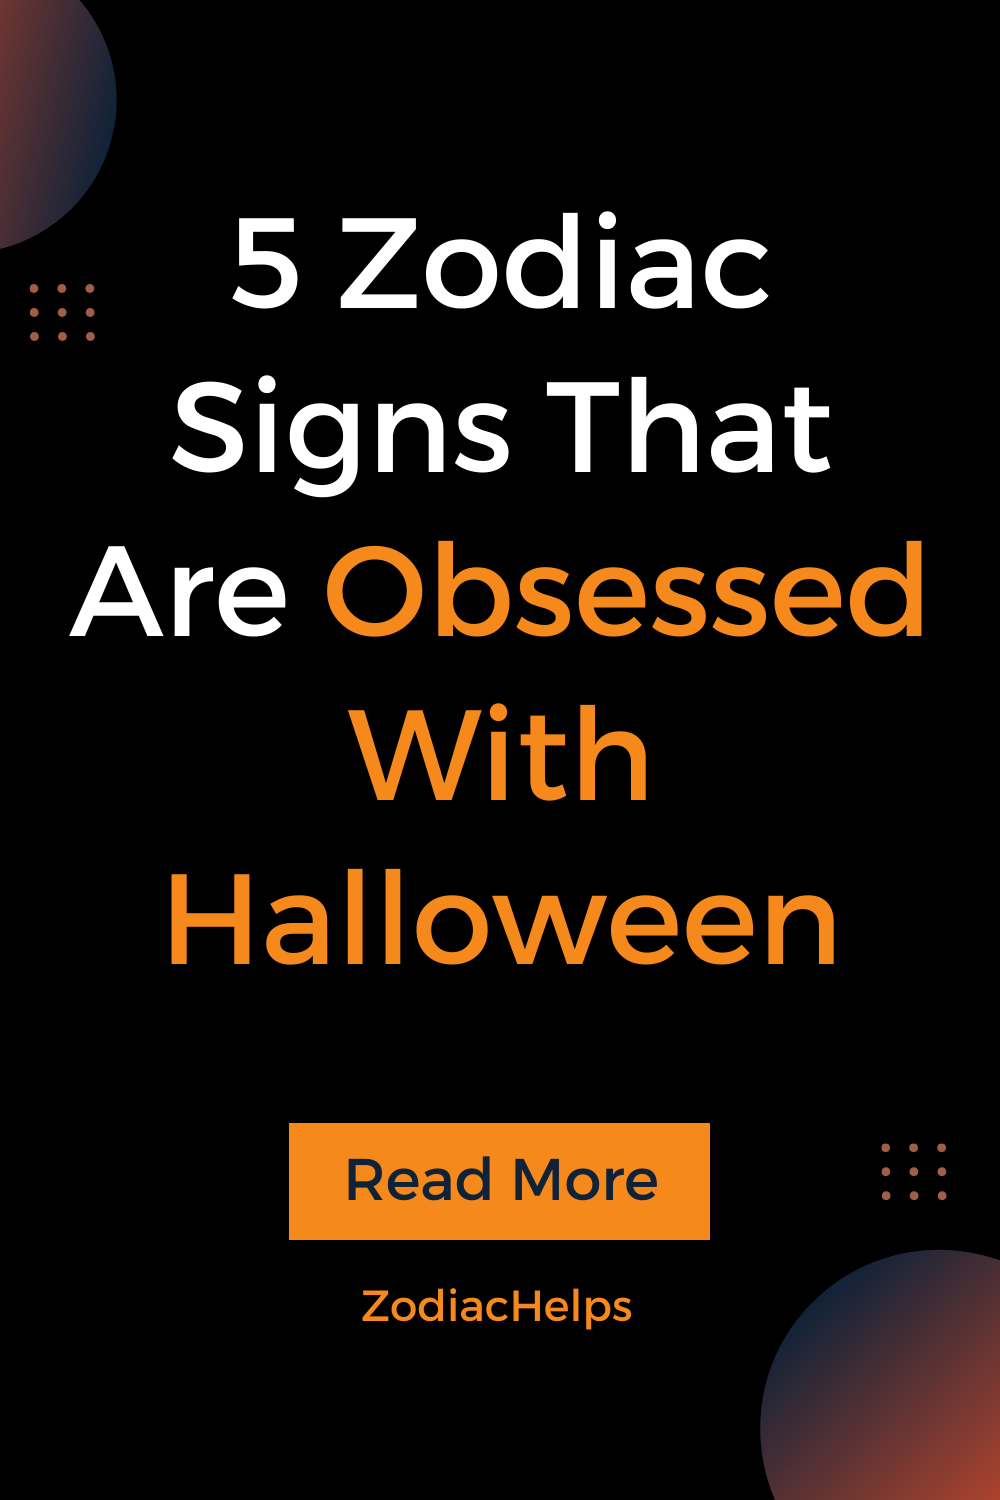 5 Zodiac Signs That Are Obsessed With Halloween